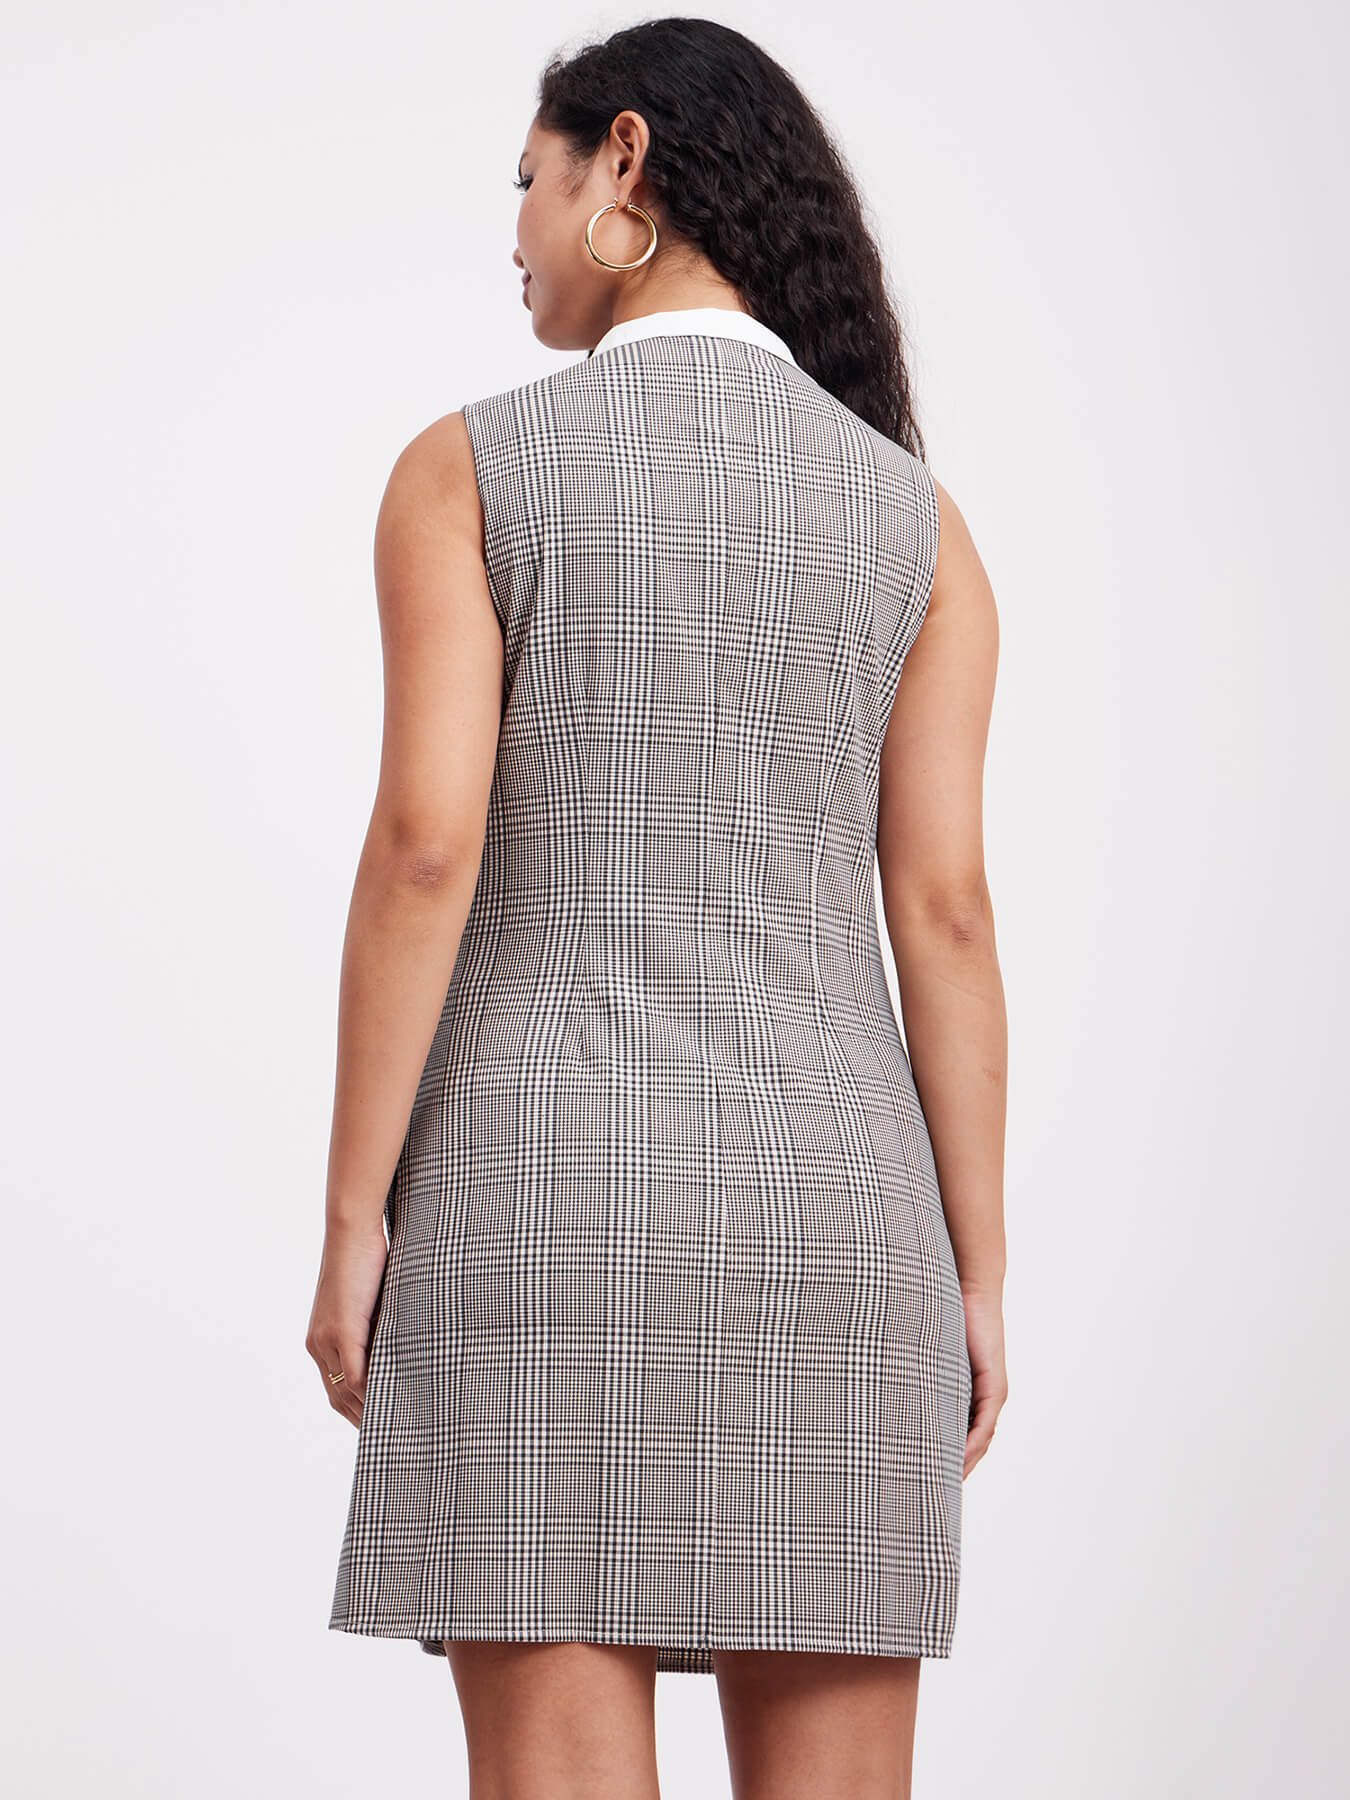 Checkered A-Line Dress - Black And White